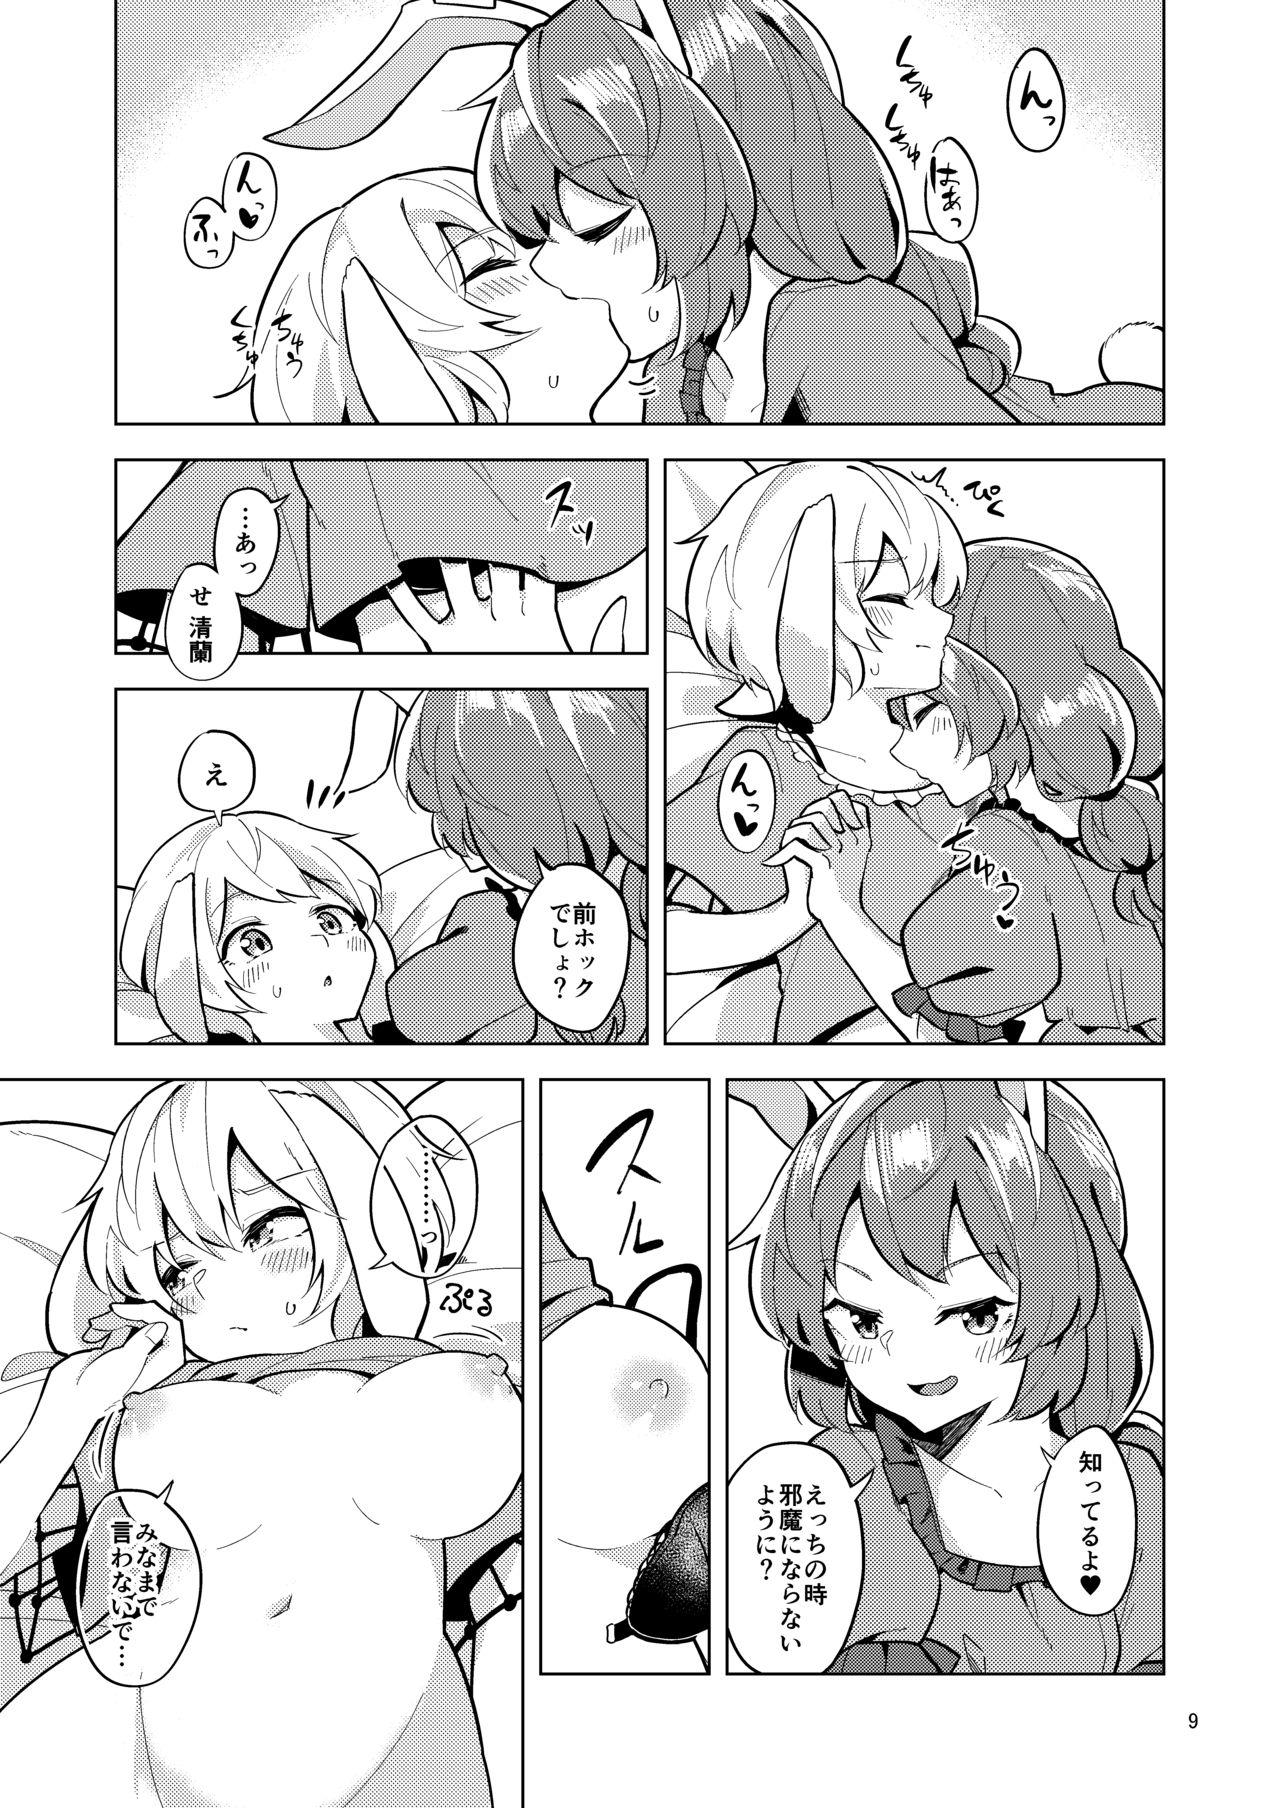 Monstercock Bittersweet Greenapple 2 - Touhou project Yanks Featured - Page 9